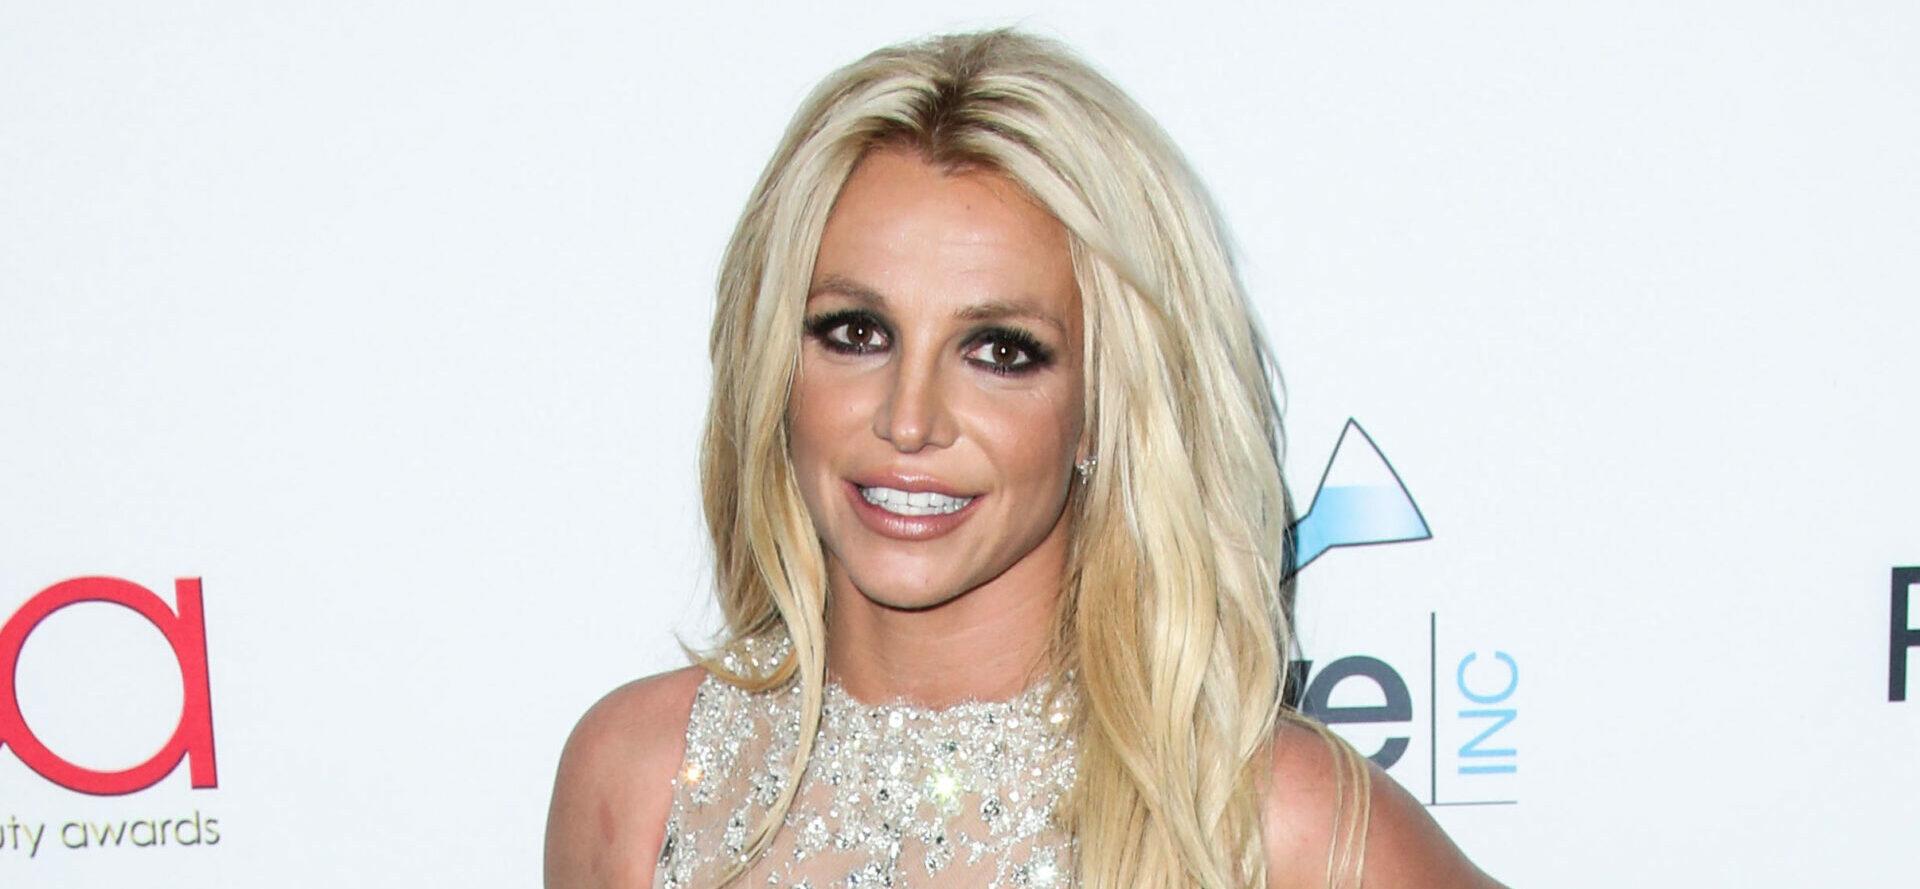 Britney Spears’ Childhood Home In Louisiana For Sale, Complete With Priceless Memorabilia